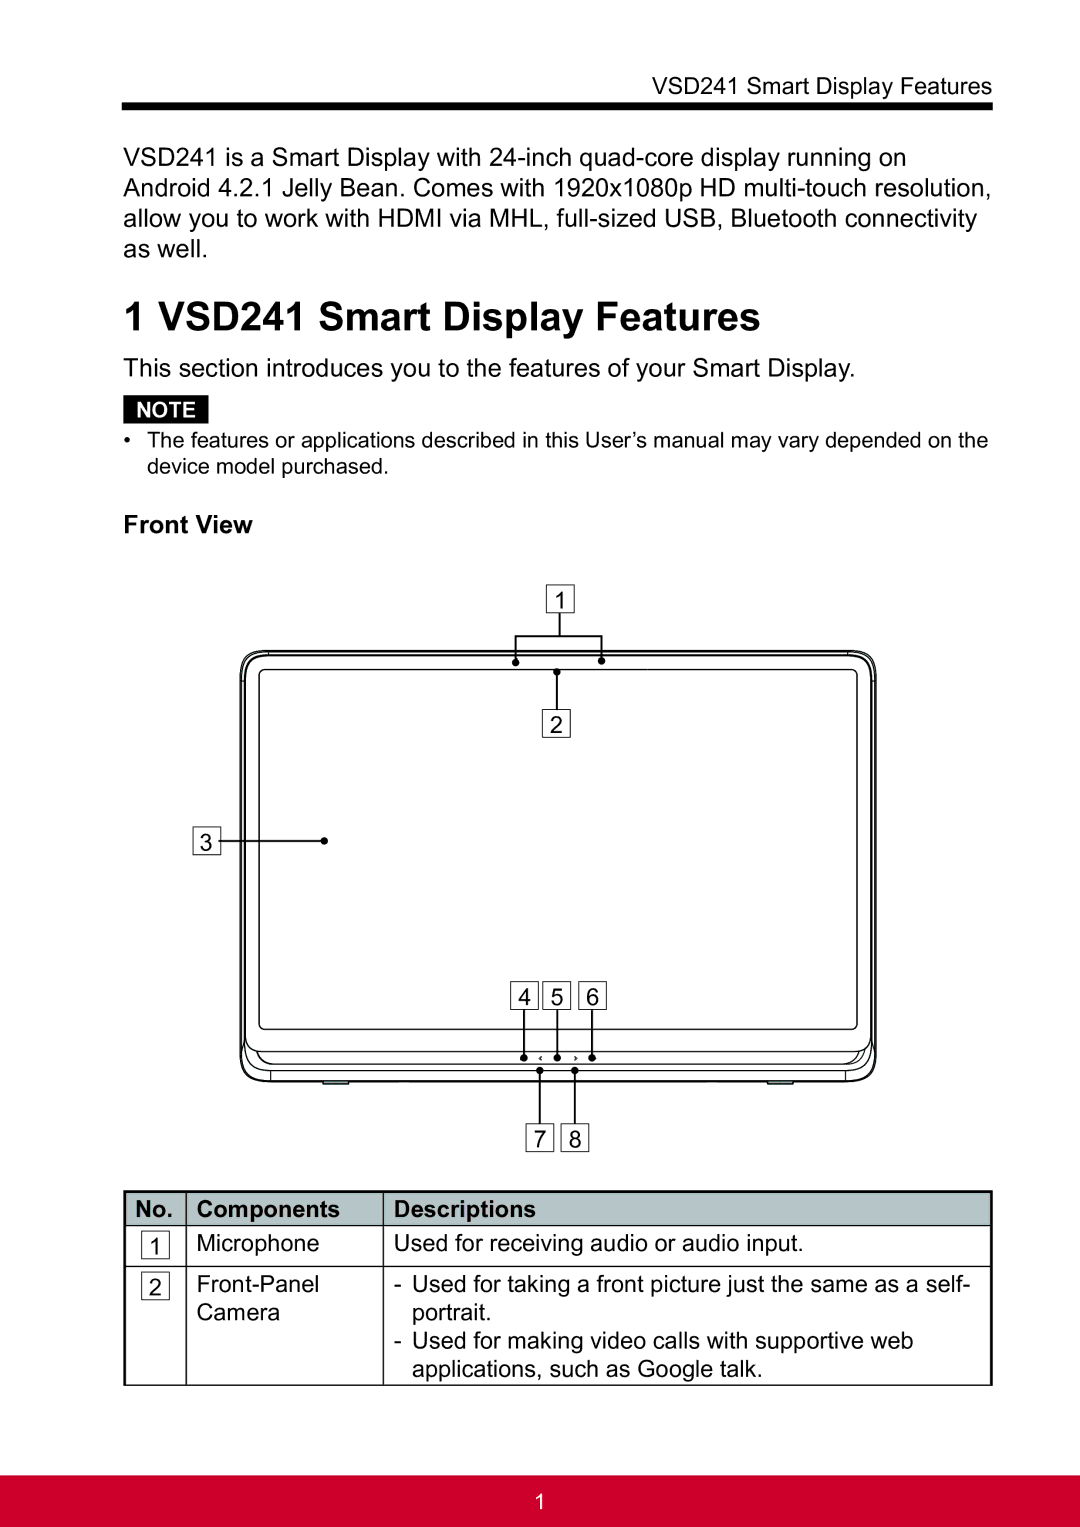 ViewSonic VSD241WTAUS0 manual VSD241 Smart Display Features, Front View, Components Descriptions 